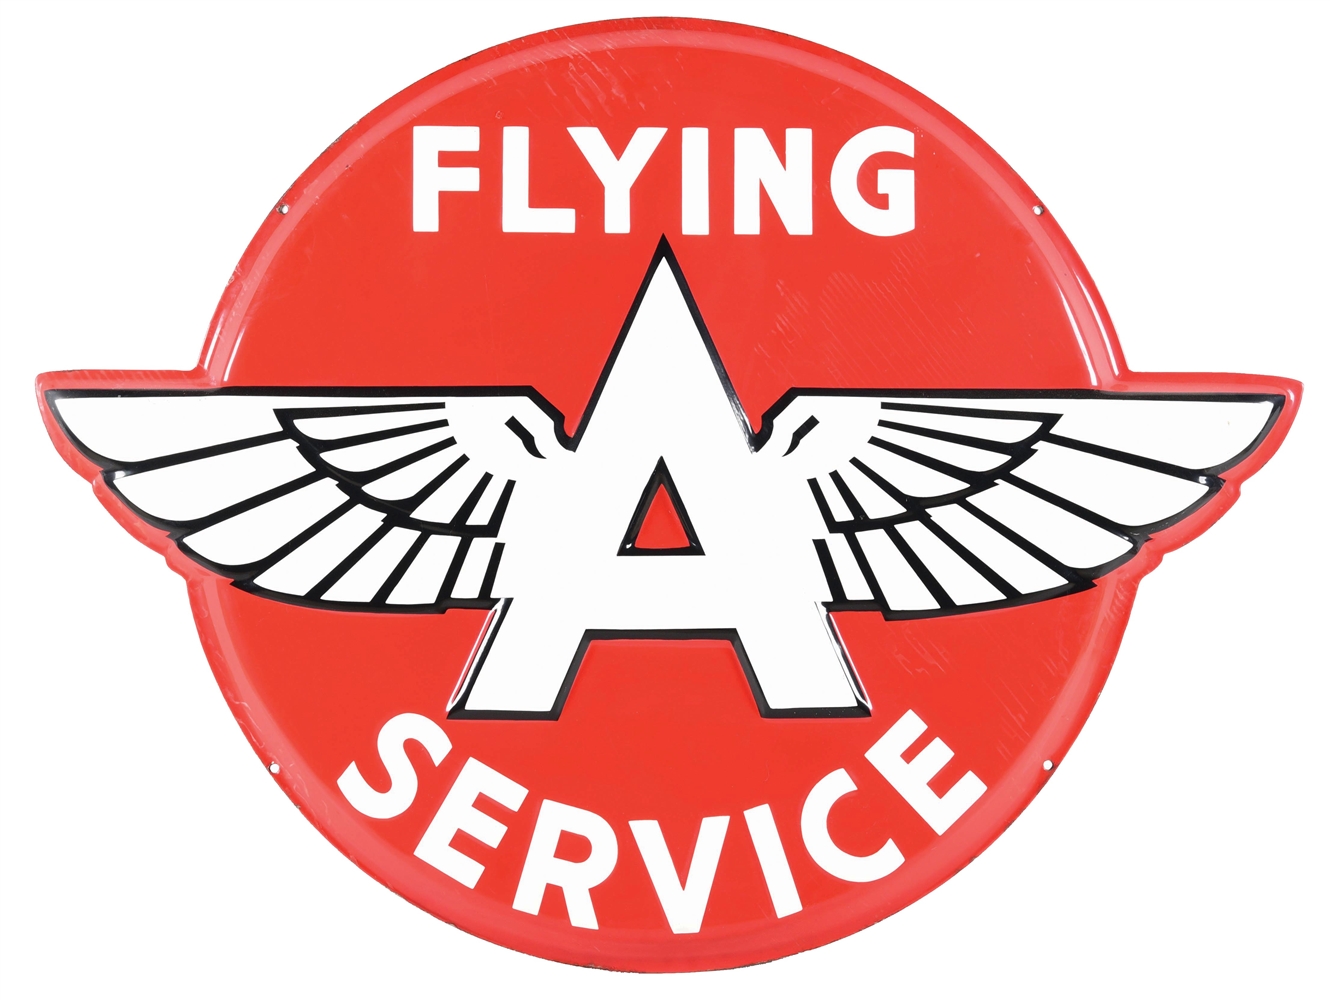 OUTSTANDING PORCELAIN FLYING A SERVICE SIGN W/ ICONIC WINGED GRAPHIC.